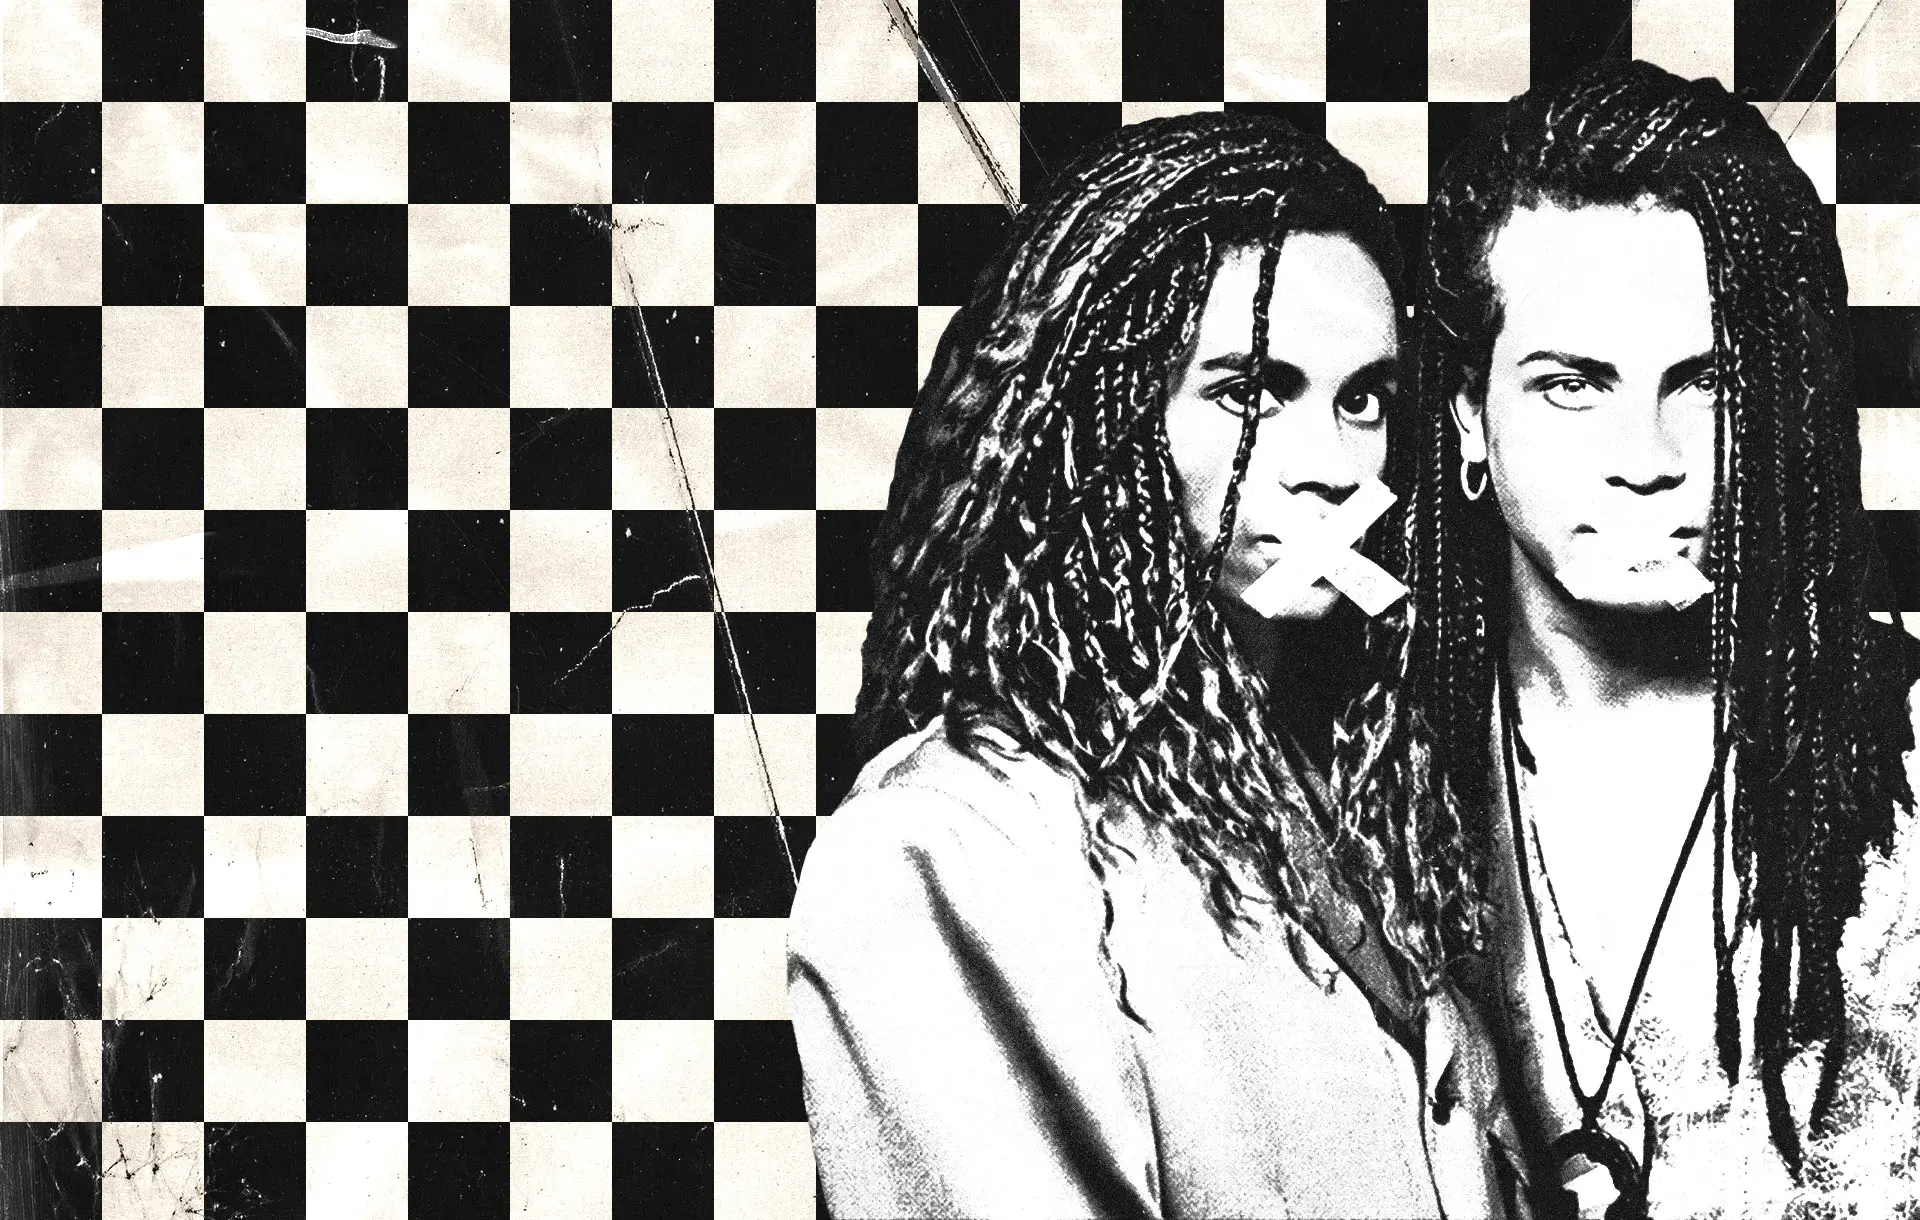 Milli Vanilli Documentary Takes a Fascinating Look at One of Music's Most Infamous Scandals | Opinions | LIVING LIFE FEARLESS